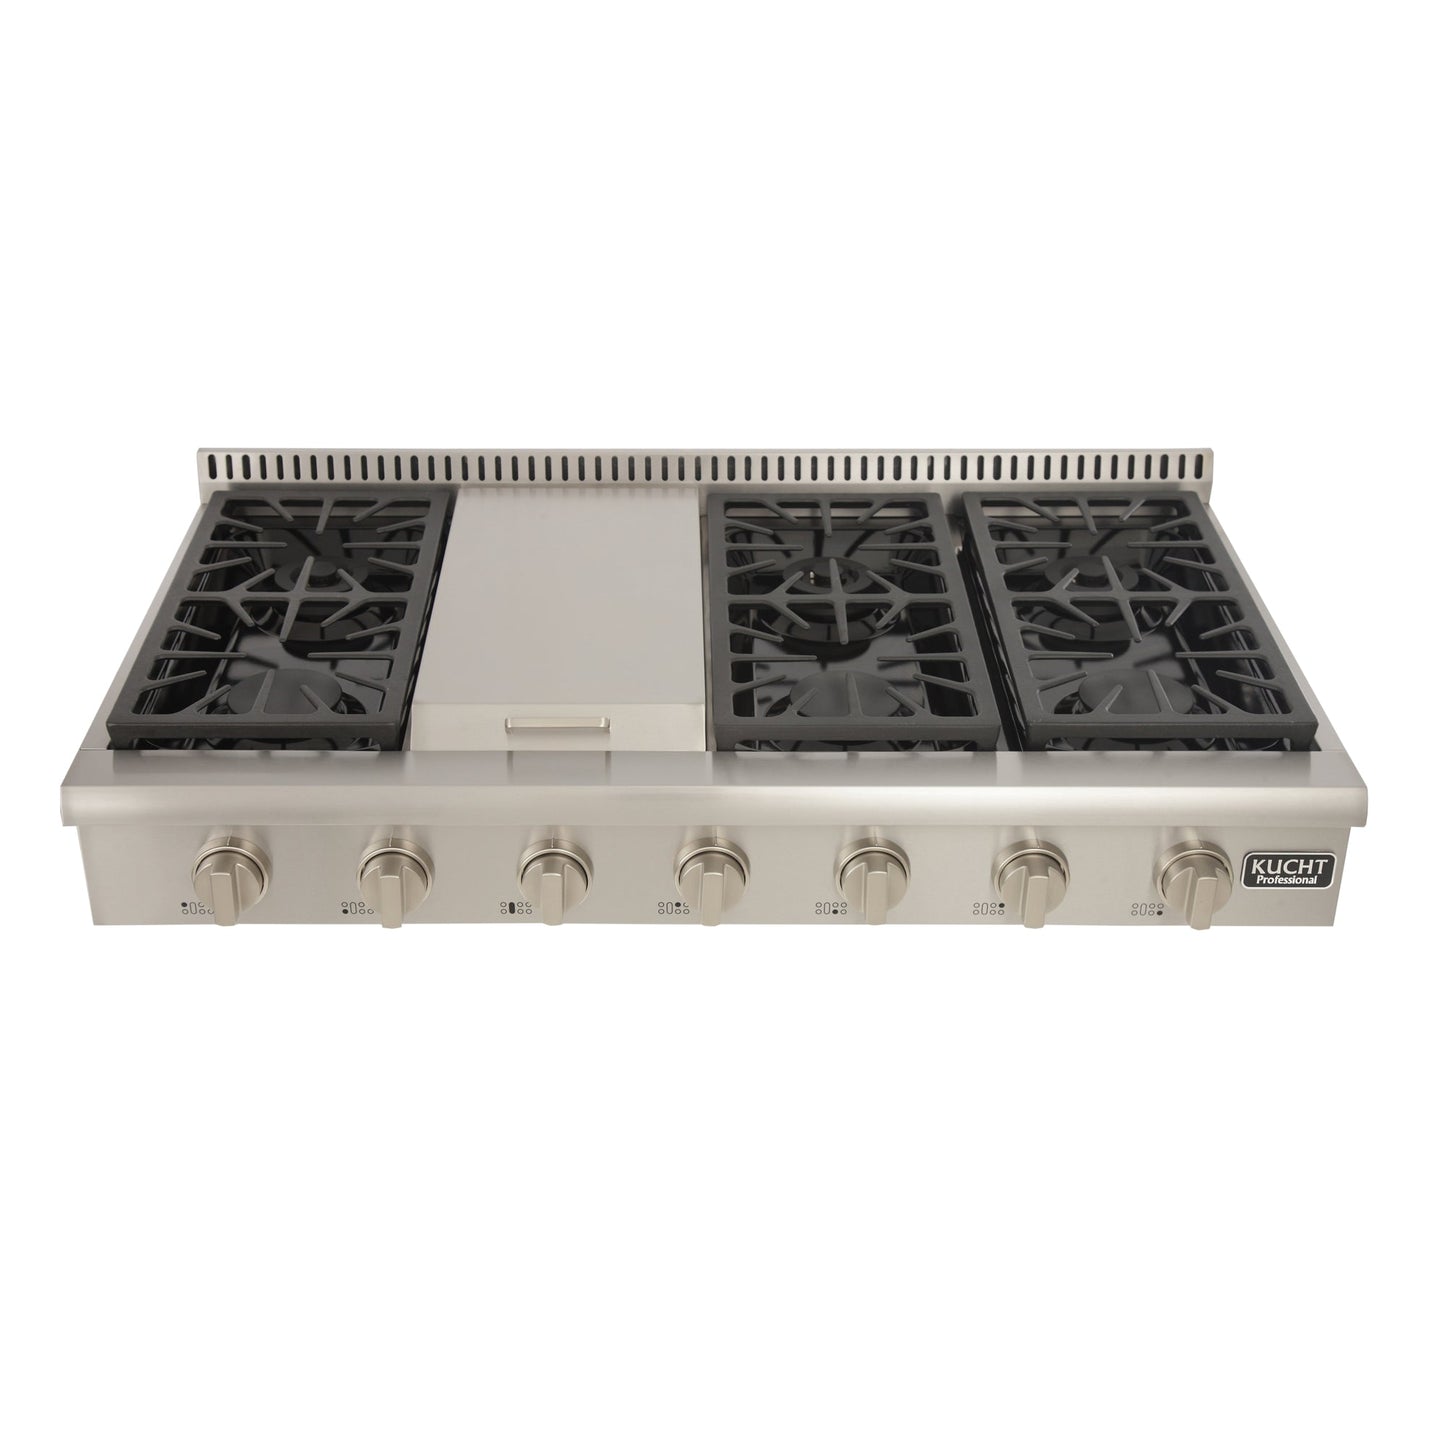 Kucht KRT Series 48" Natural Gas Range-Top With 6 Burners, Griddle and Classic Silver Knobs